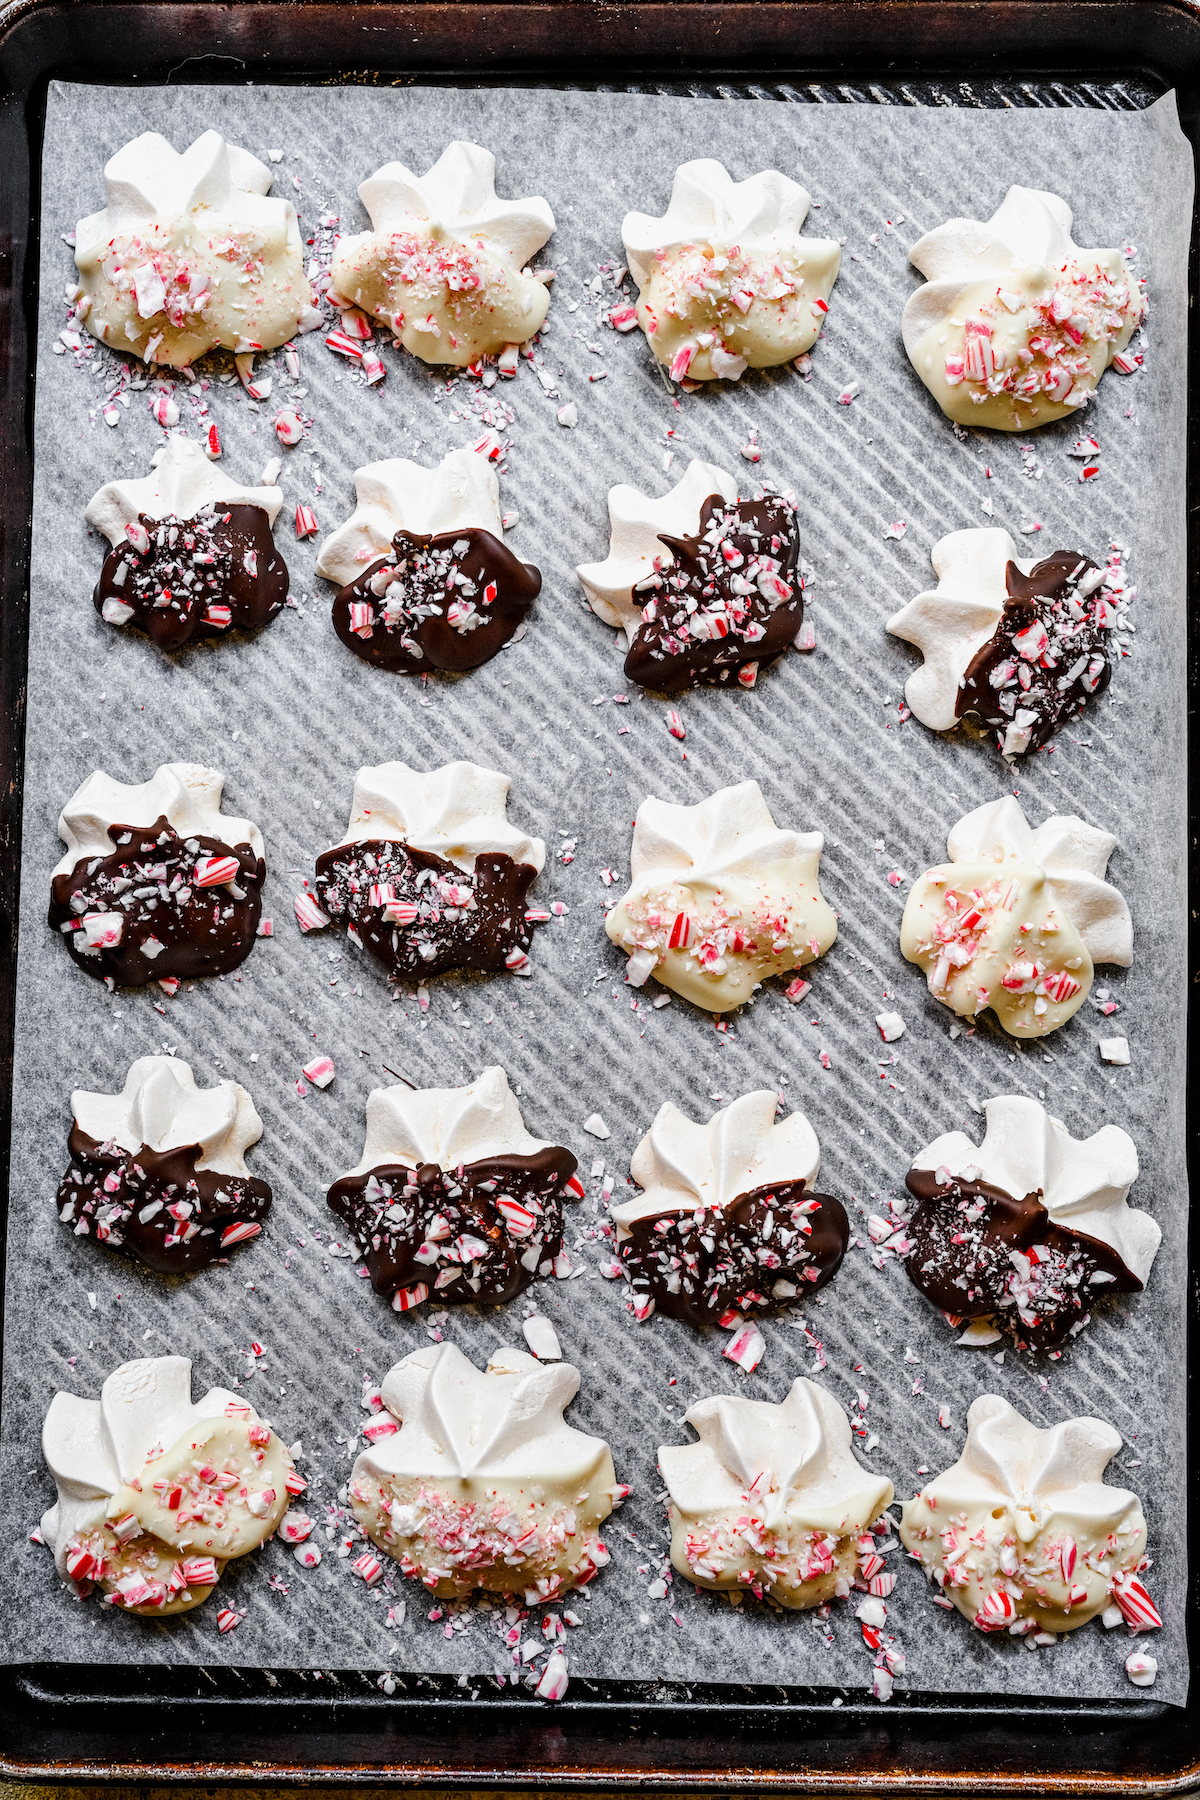 A baking sheet of chocolate and peppermint meringues lined up on a baking sheet.